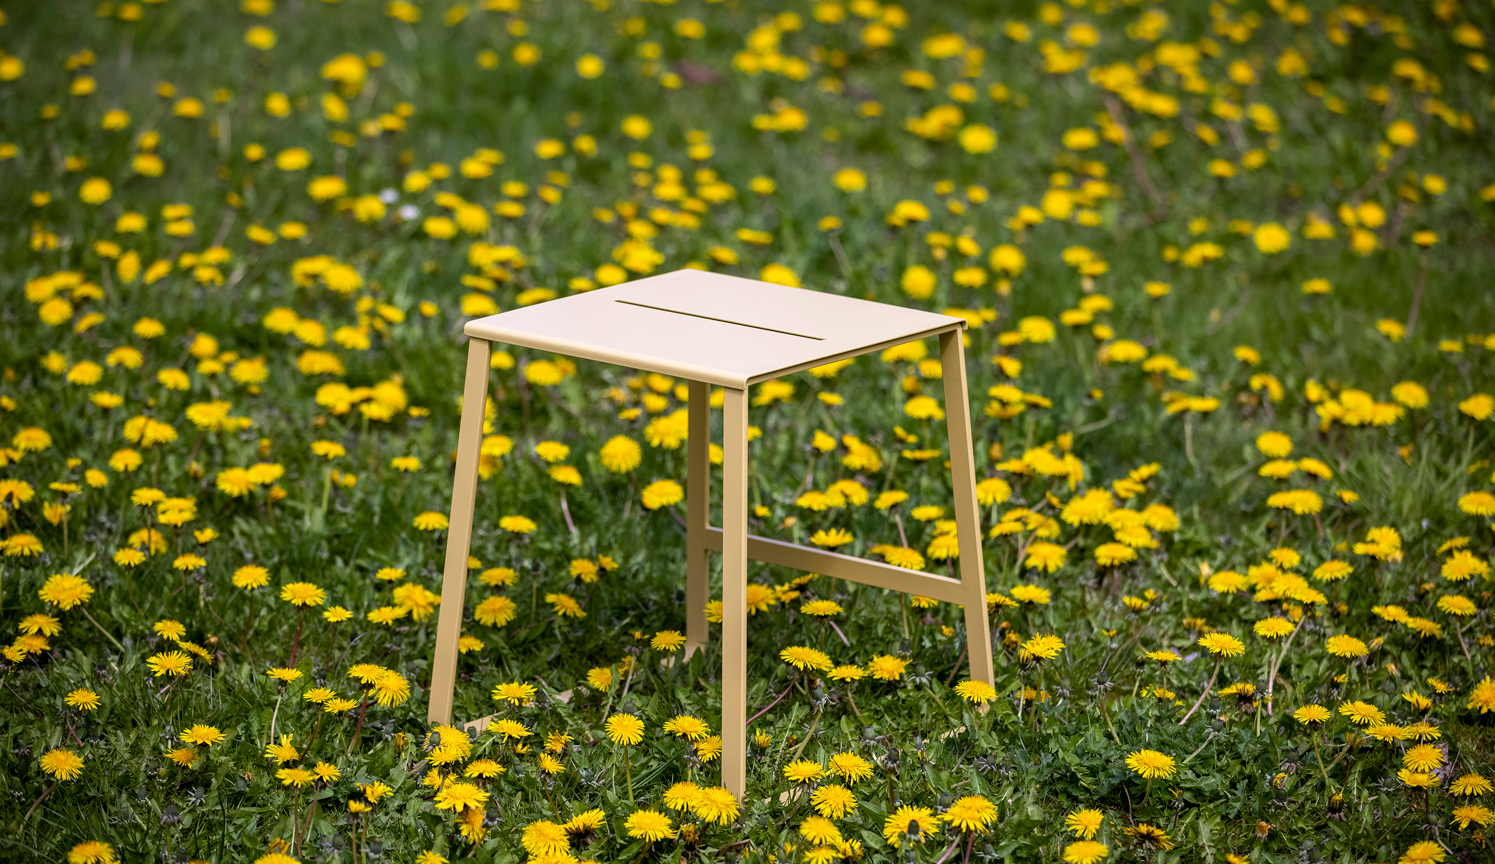 A metal stool for indoors and outdoors is seen on a field of dandelions